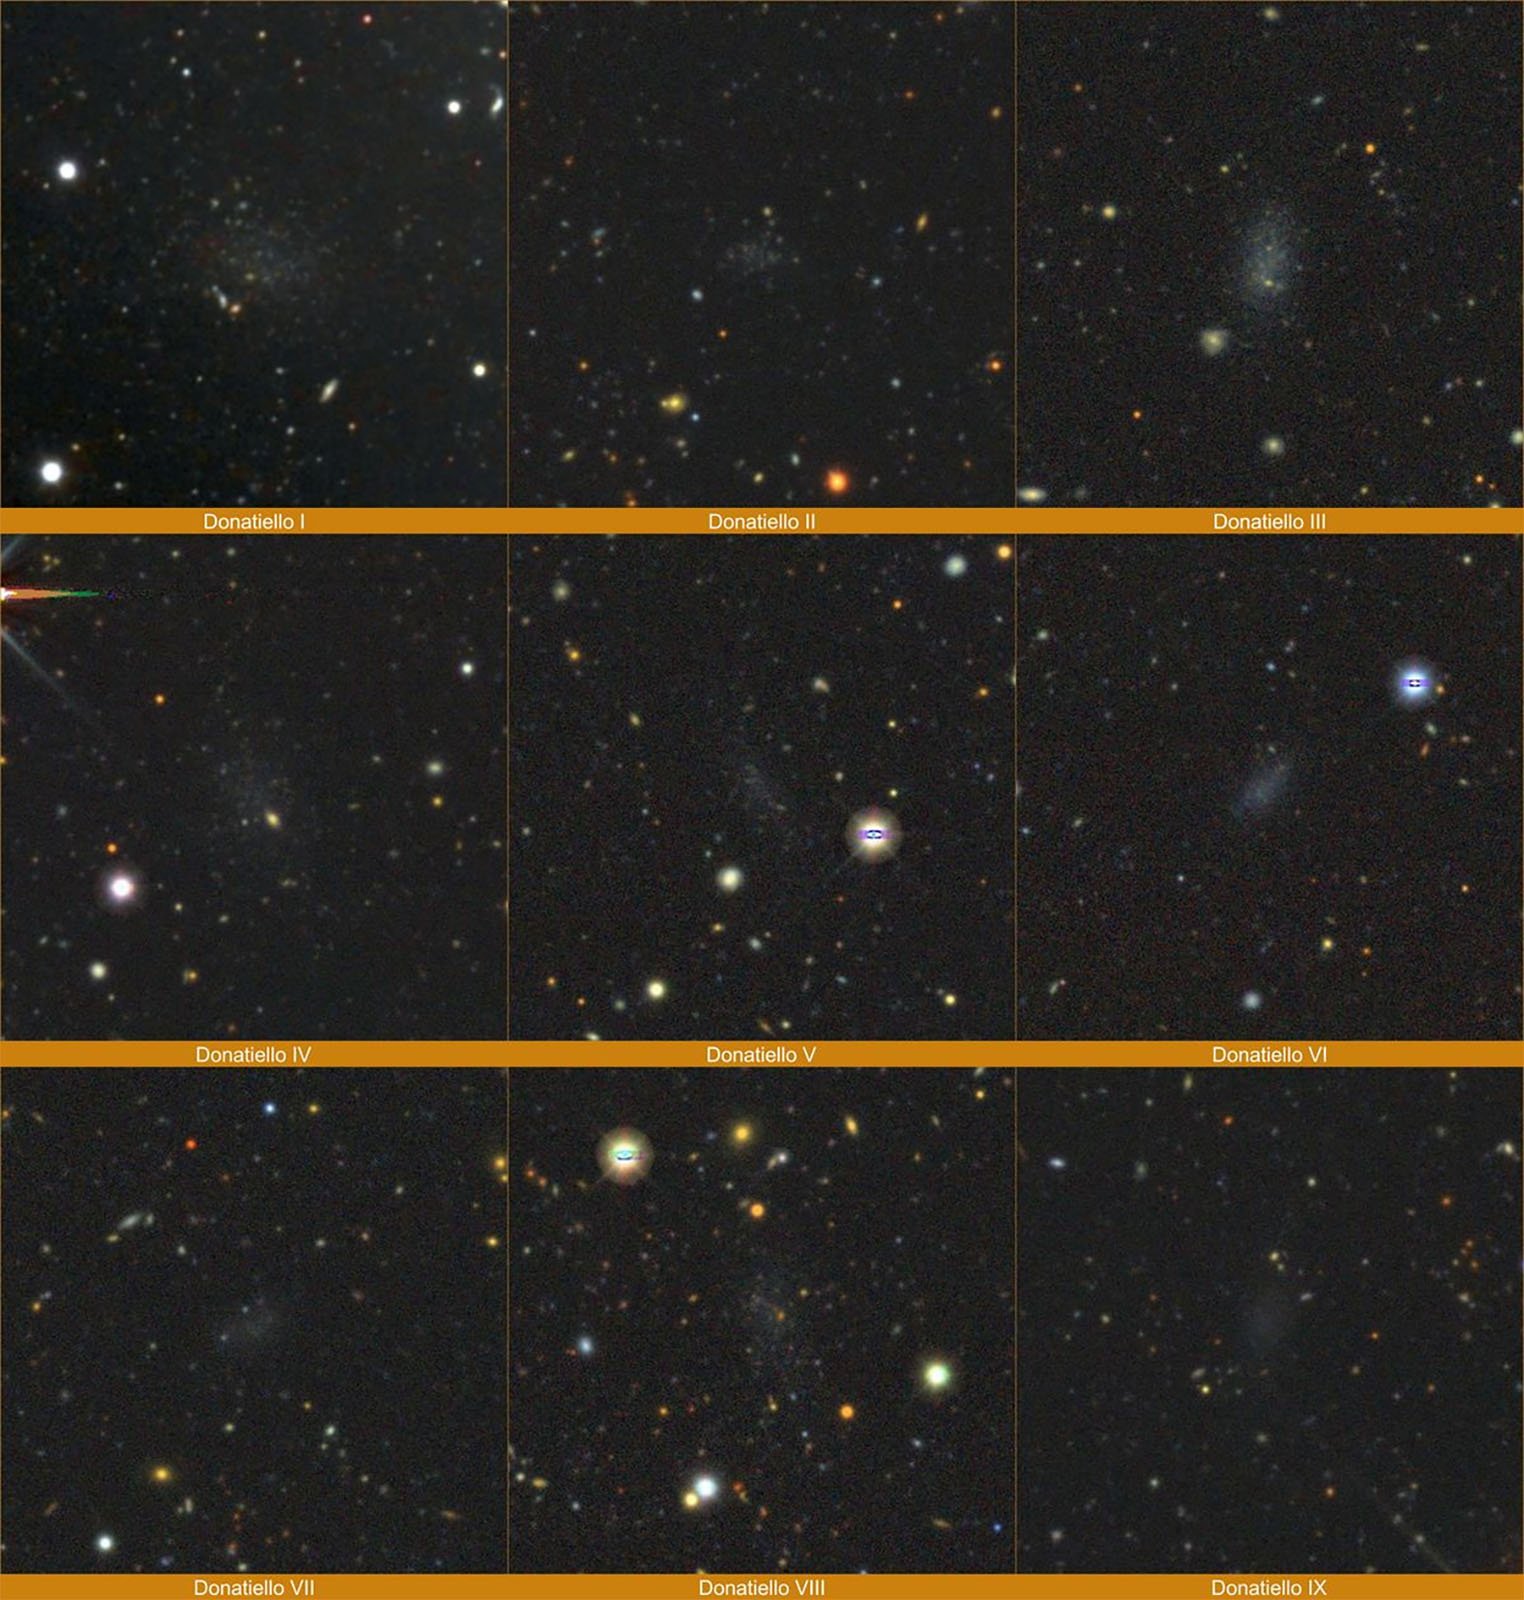 A composite image shows nine telescopic views of galaxies, each labeled "Donatiello I" to "Donatiello IX". The galaxies vary in size and structure, set against a starry background. The labels are placed below each respective image.